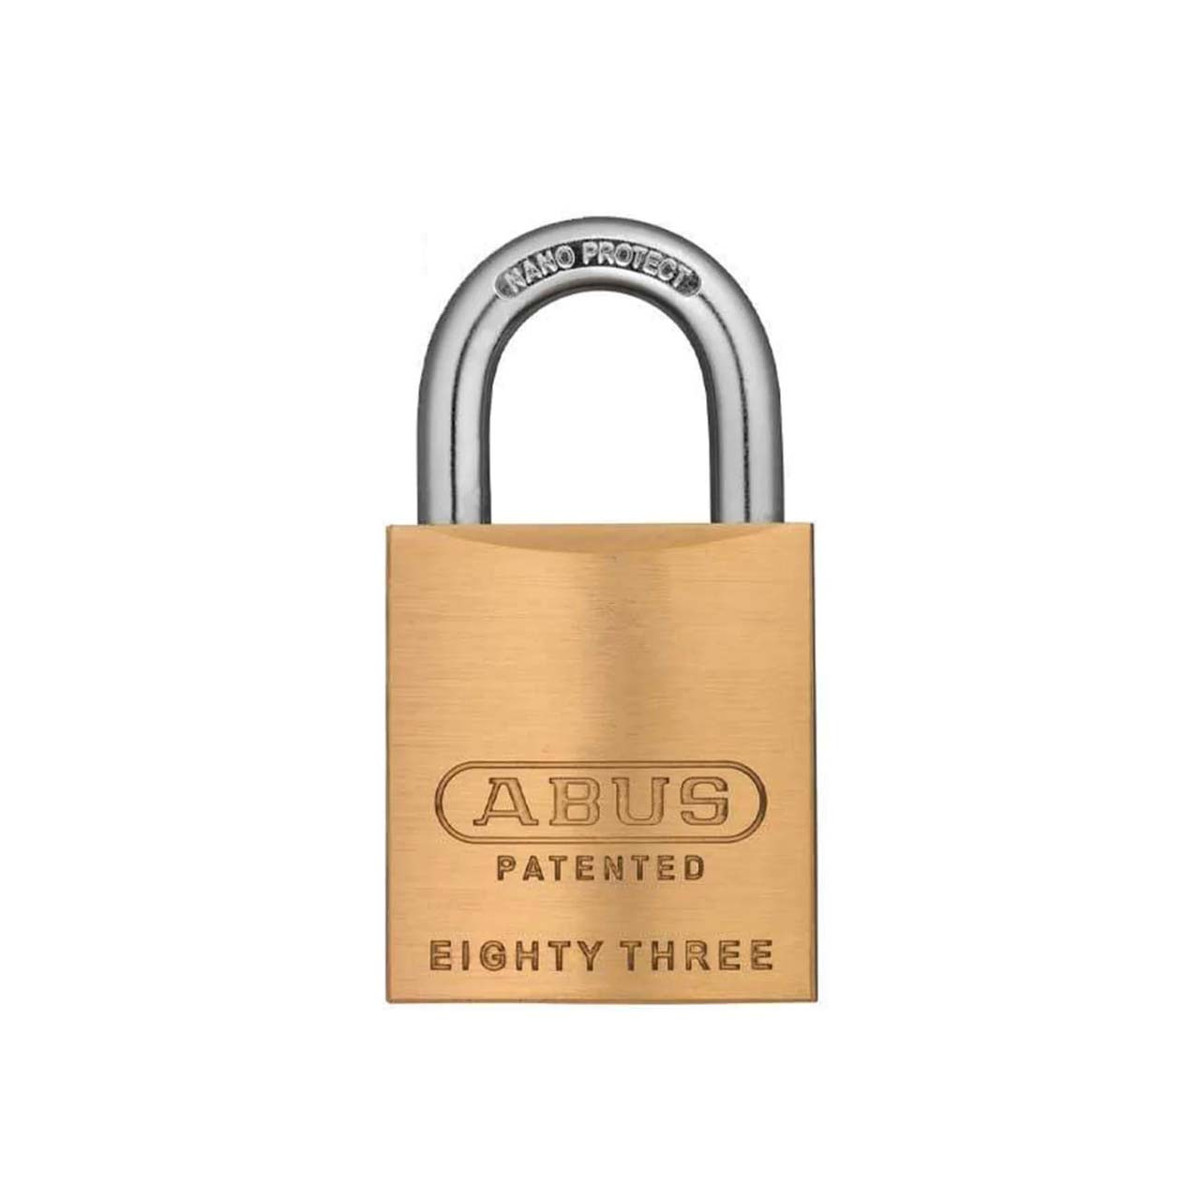 Abus 83/45-S2 Rekeyable Brass Padlock, Less Cylinder and Adapters, 1-3/4" Wide, 1" Vertical Clearance, 5/16" Diameter